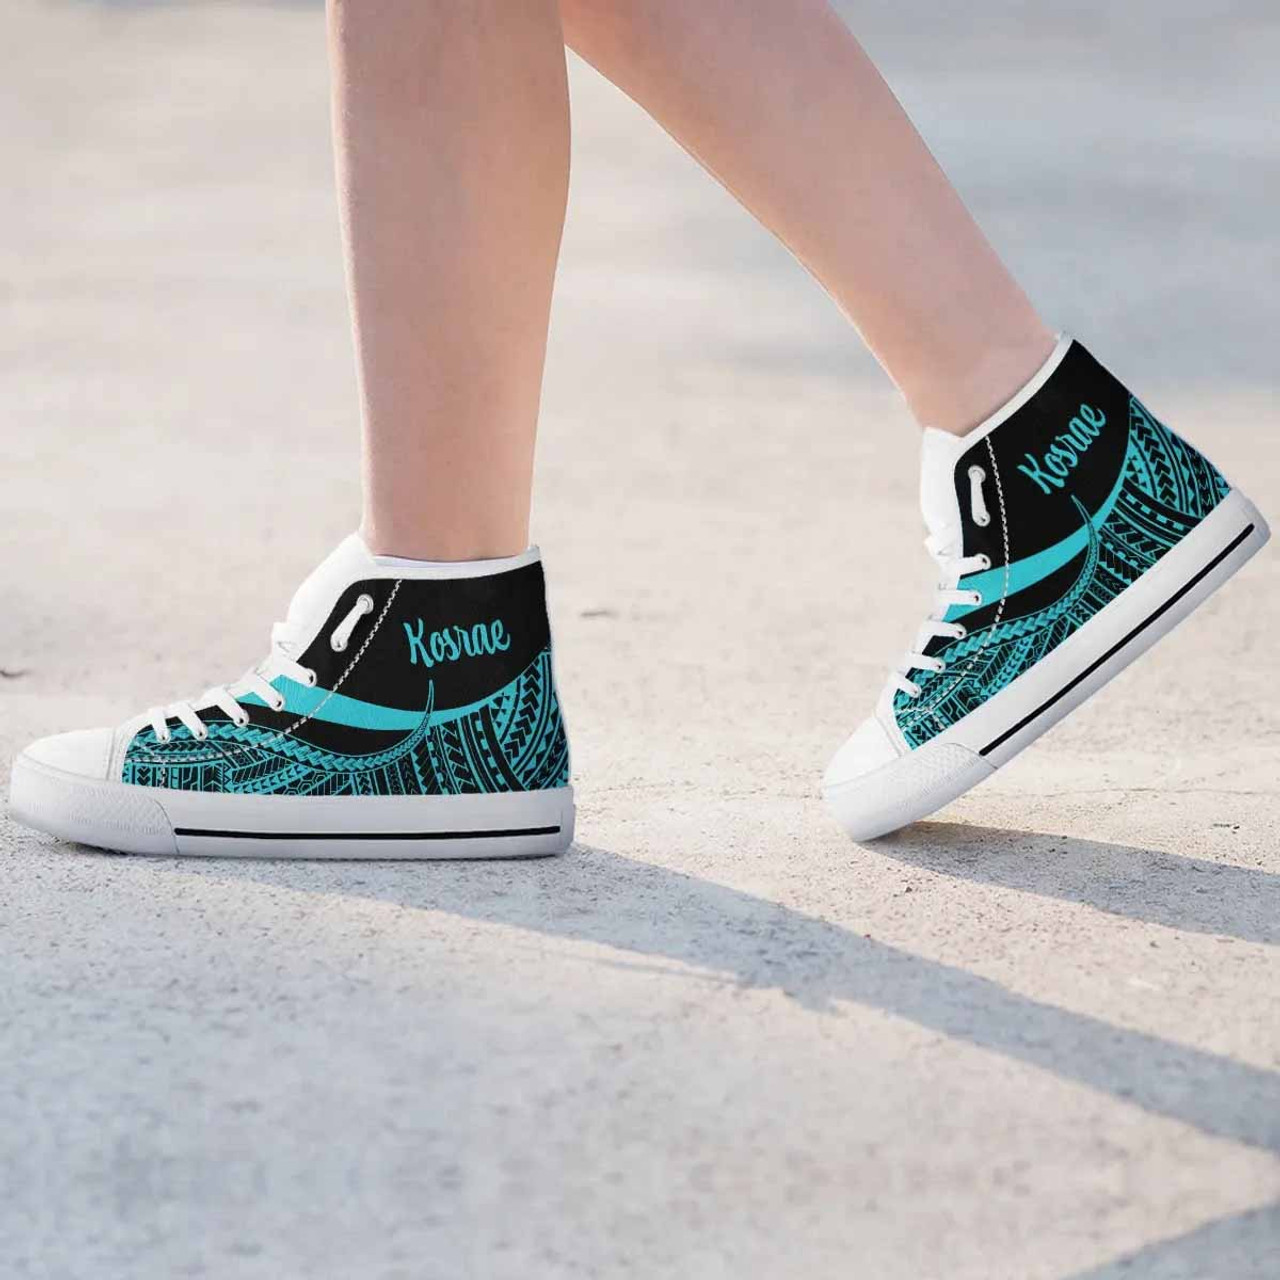 Kosrae High Top Shoes Turquoise - Polynesian Tentacle Tribal Pattern 7